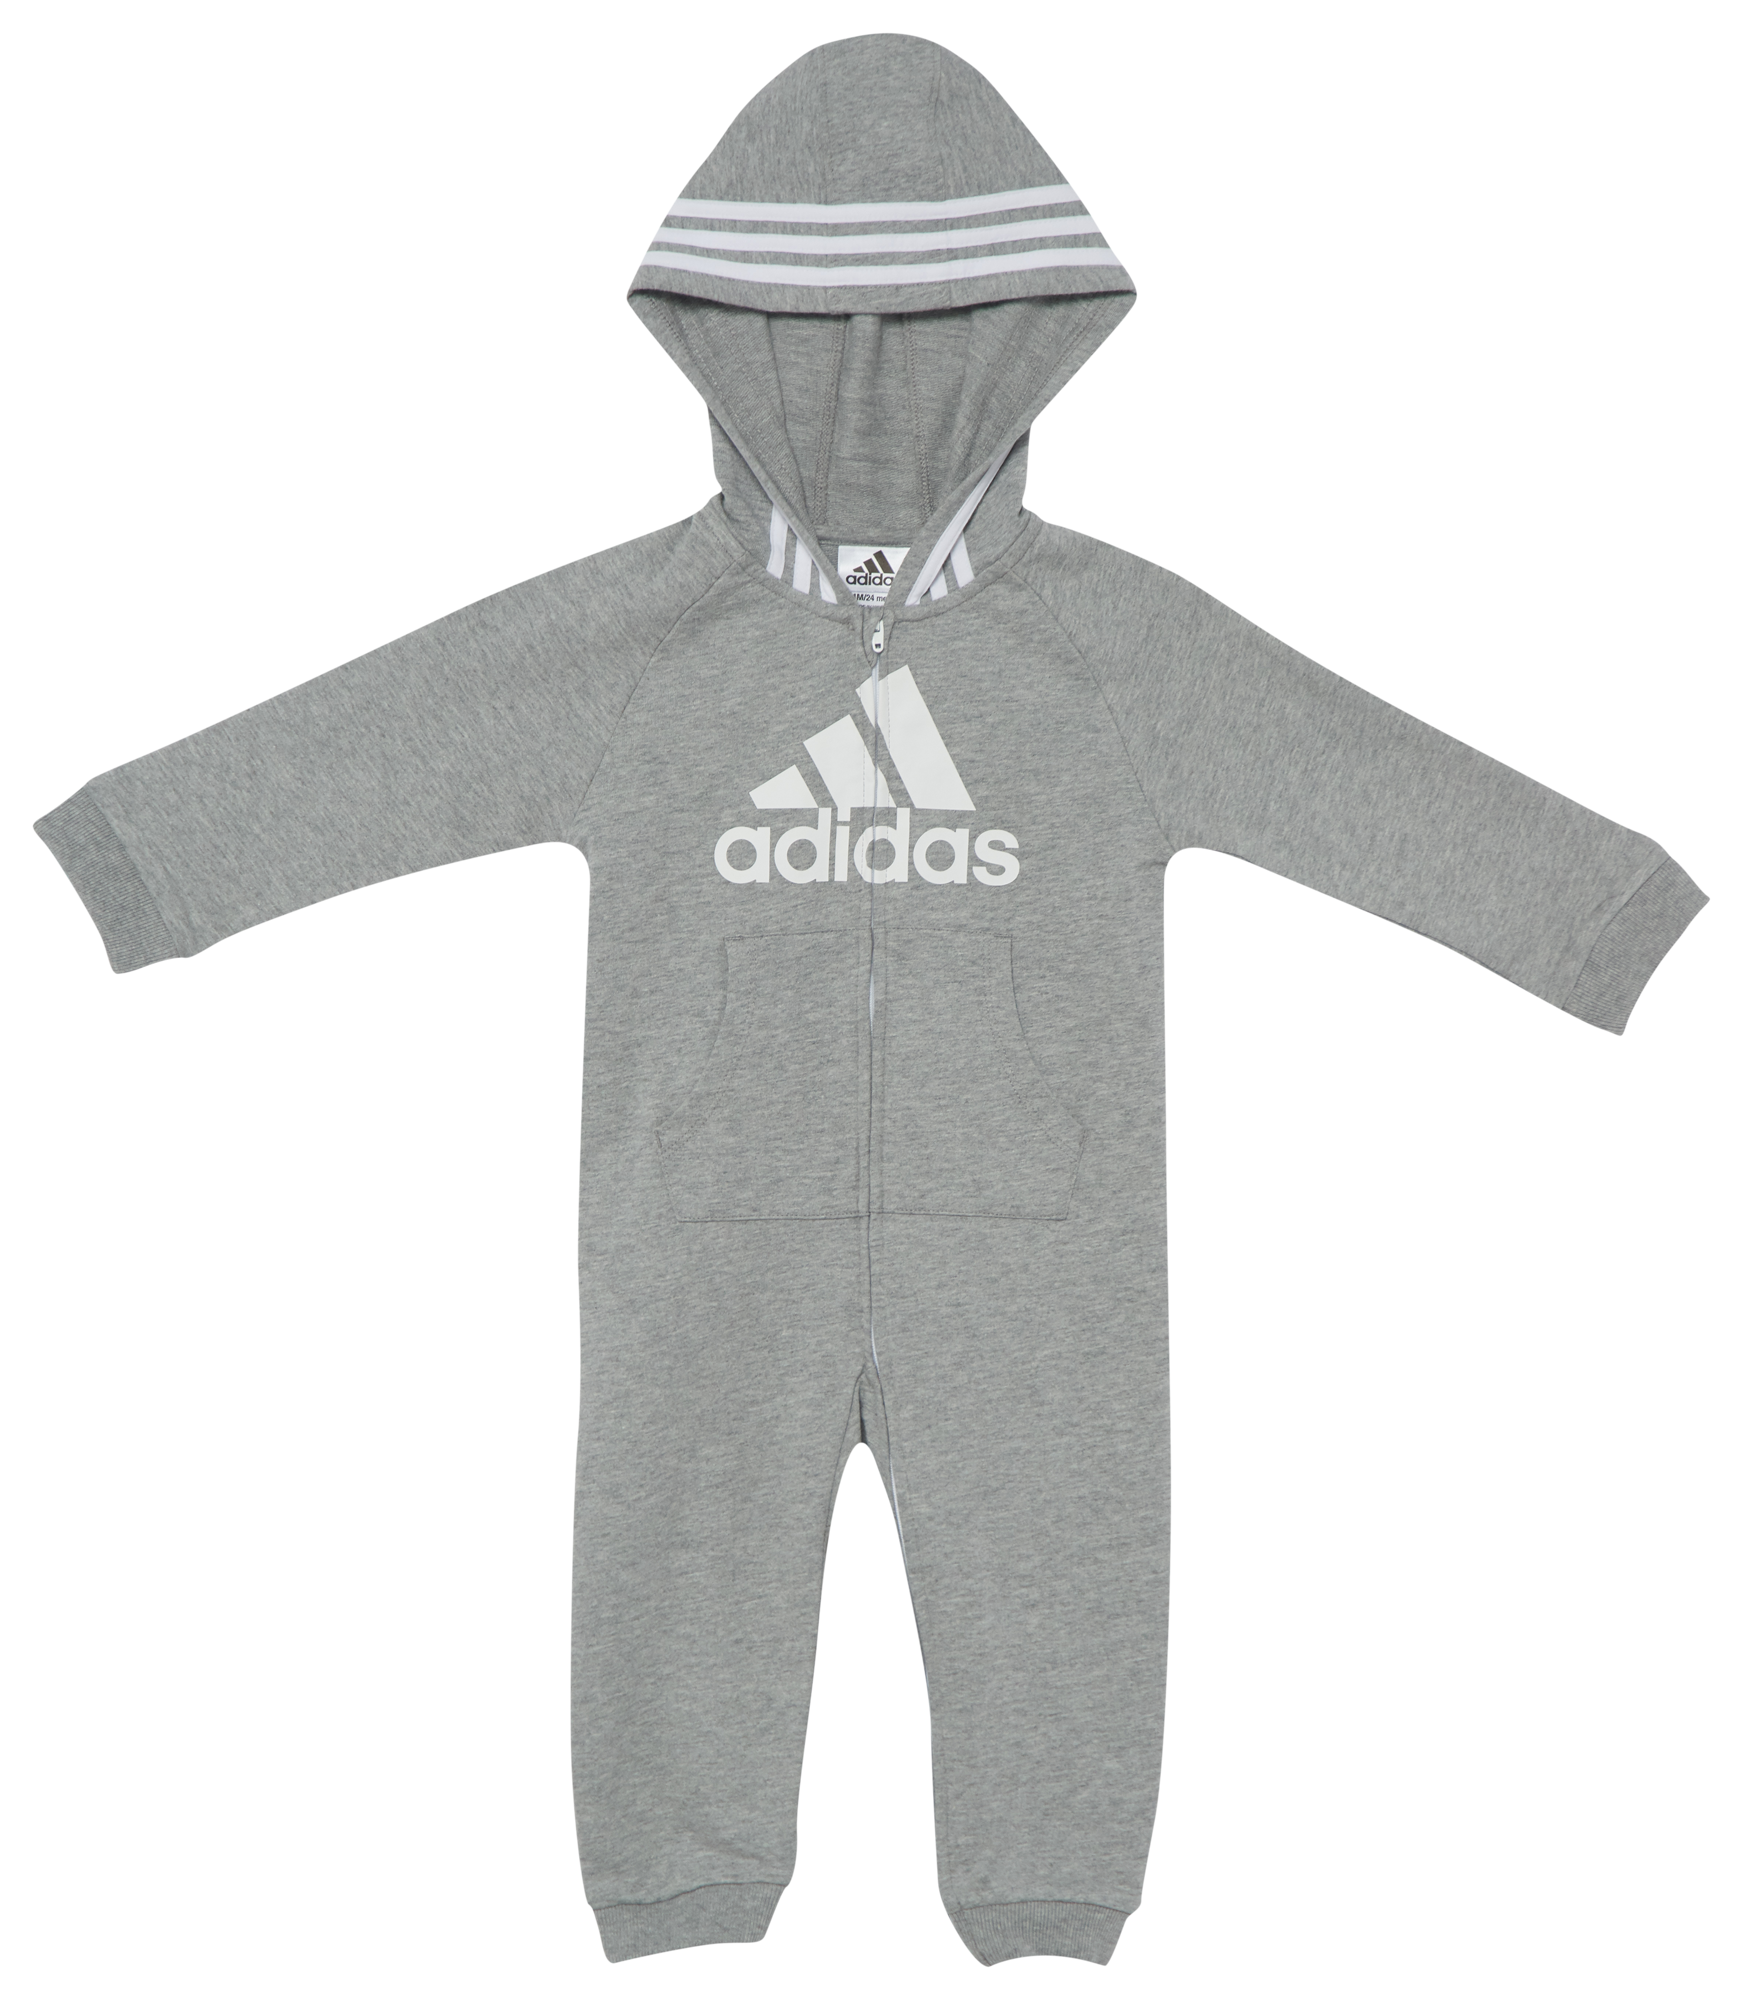 champion jumpsuits for babies